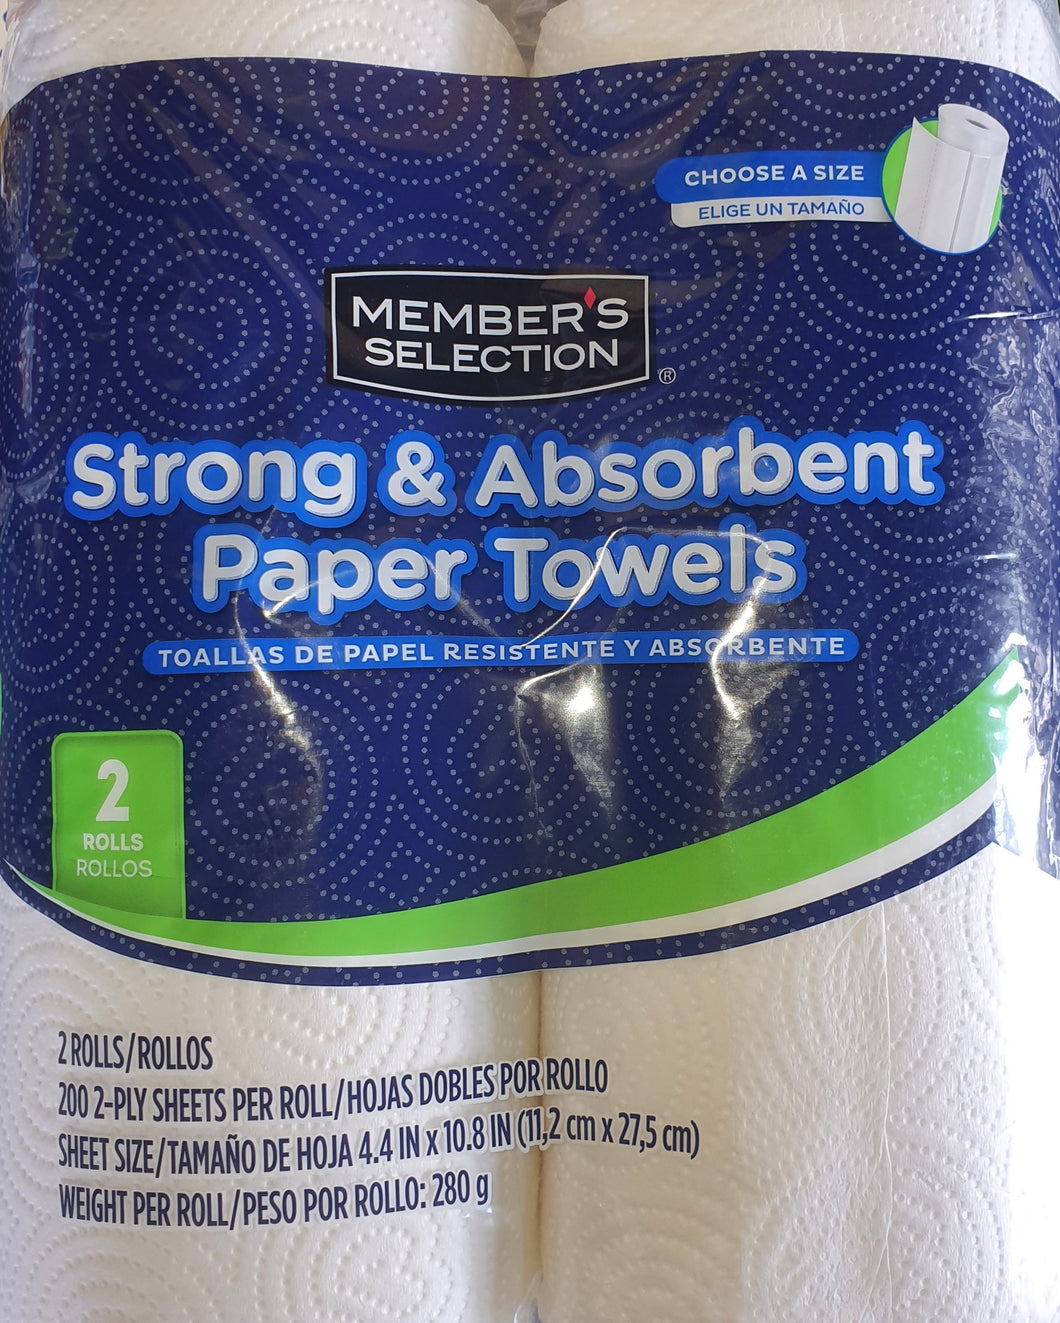 PAPEL TOALLA/ PAPER TOWELS MEMBERS SELECTION